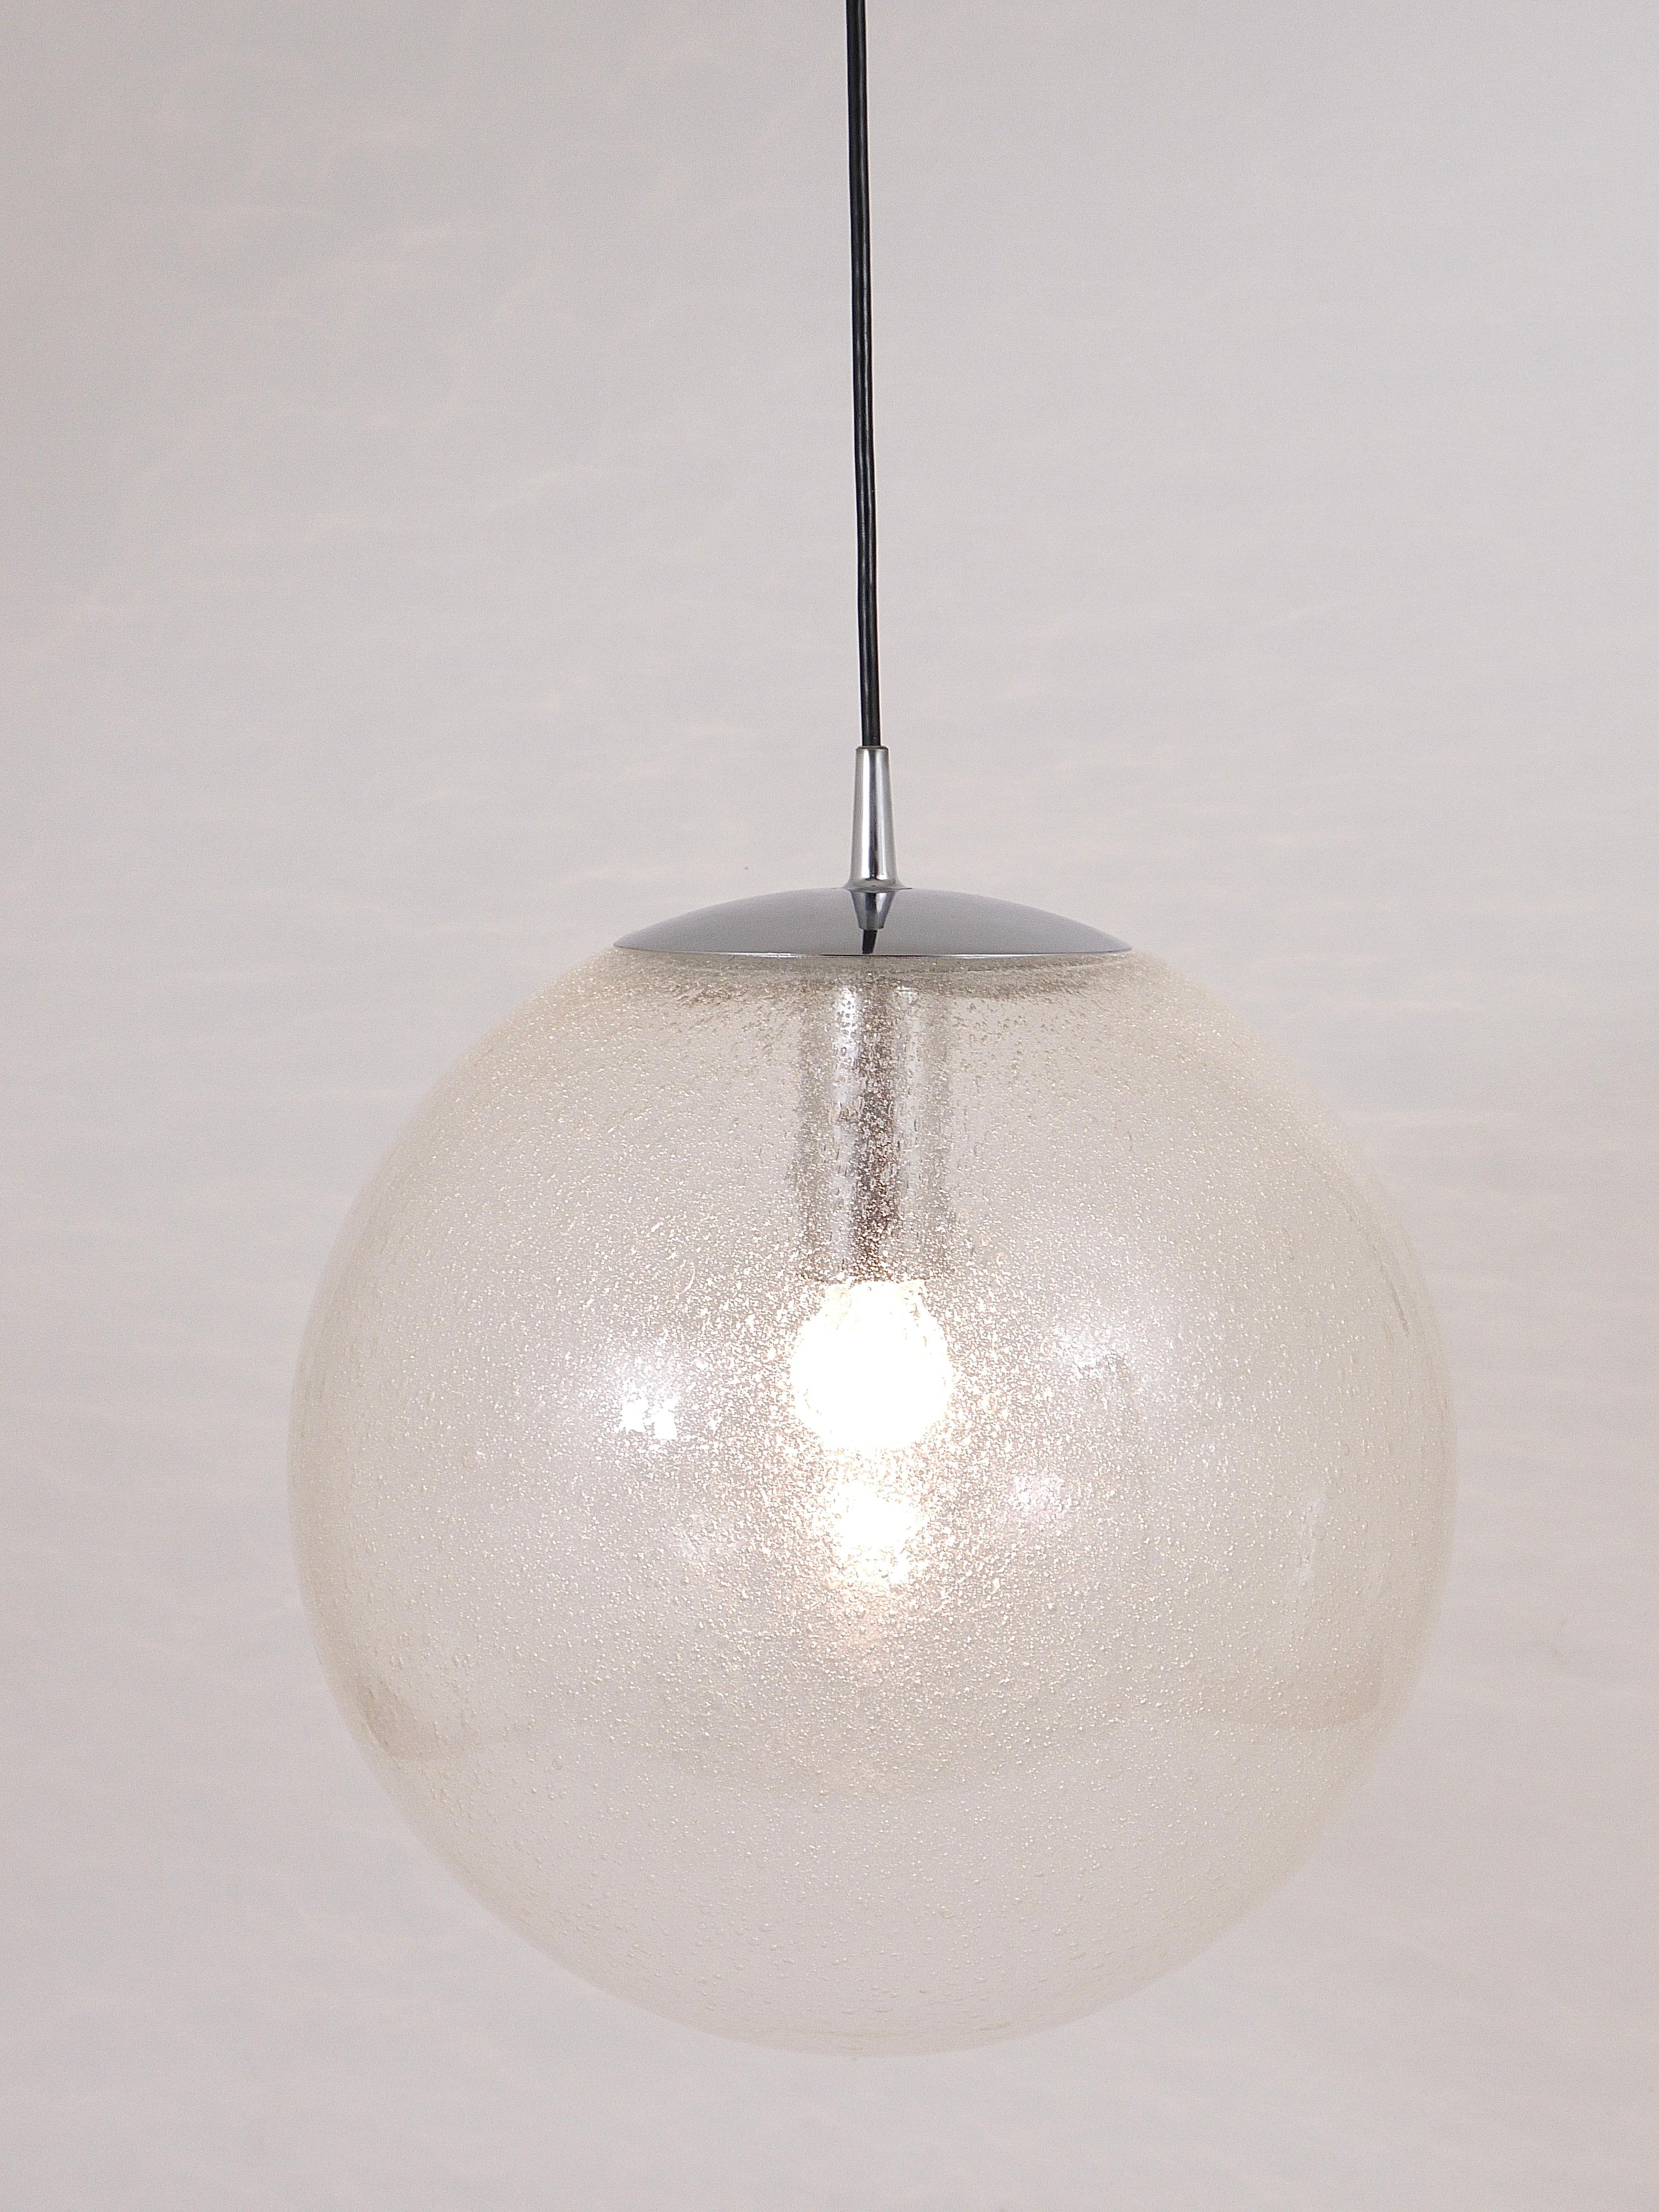 Large Peil & Putzler Bubble Glass and Chrome Globe Pendant Lamp, Germany, 1970s For Sale 2